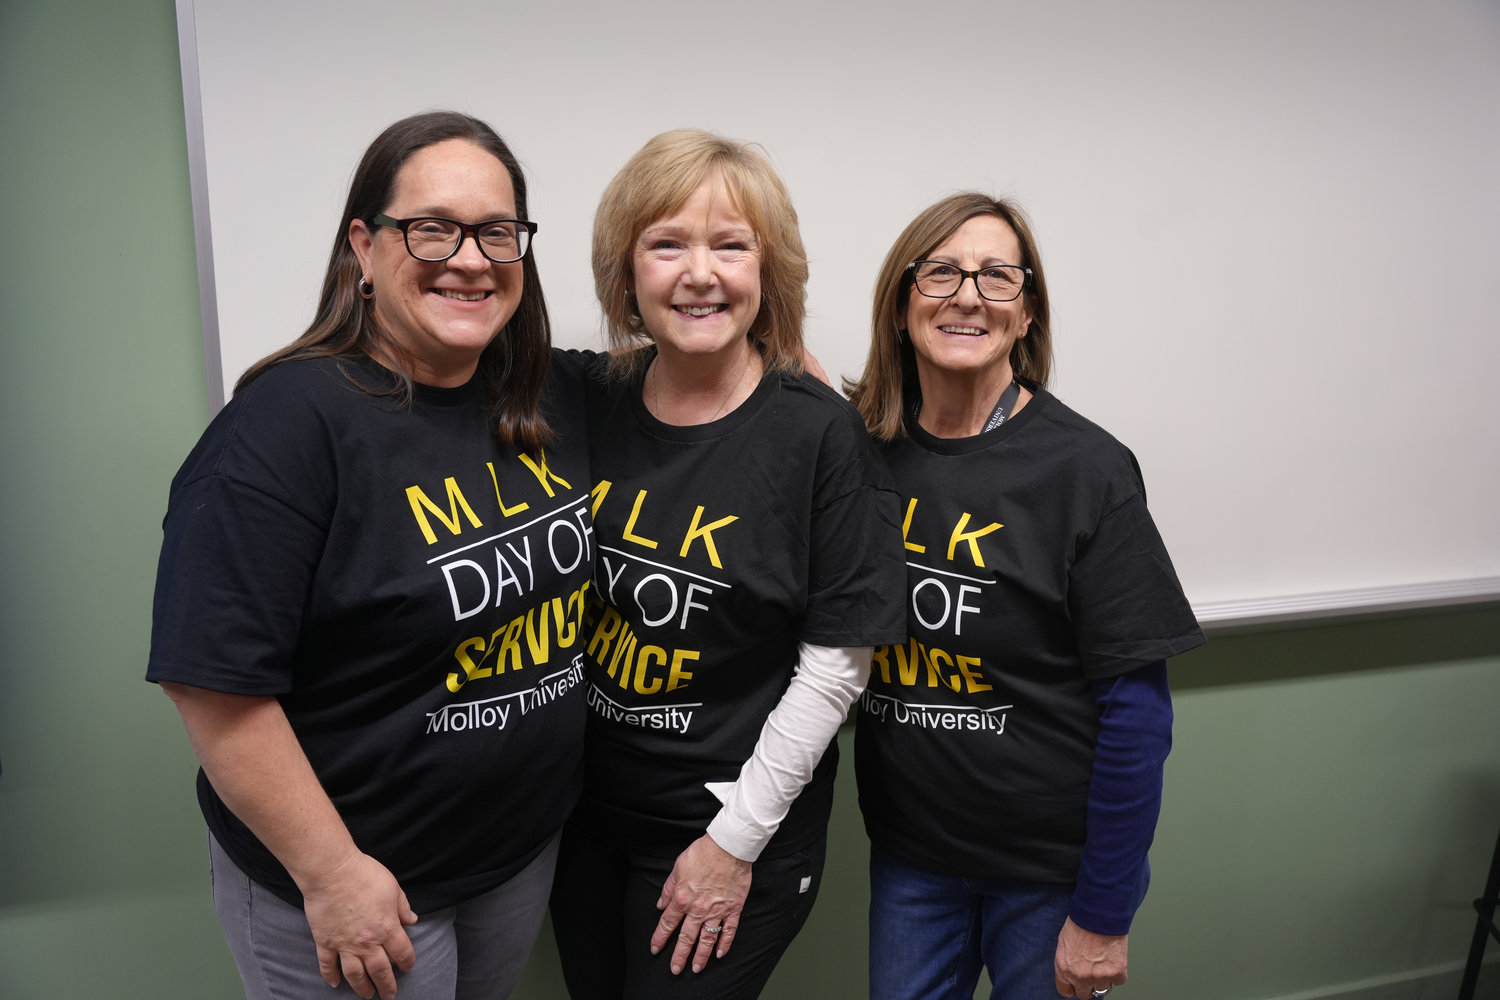 Mary McCormack, Elizabeth Cotter, and Geraldine Moore participate in Molloy University’s MLK Day of Service event.